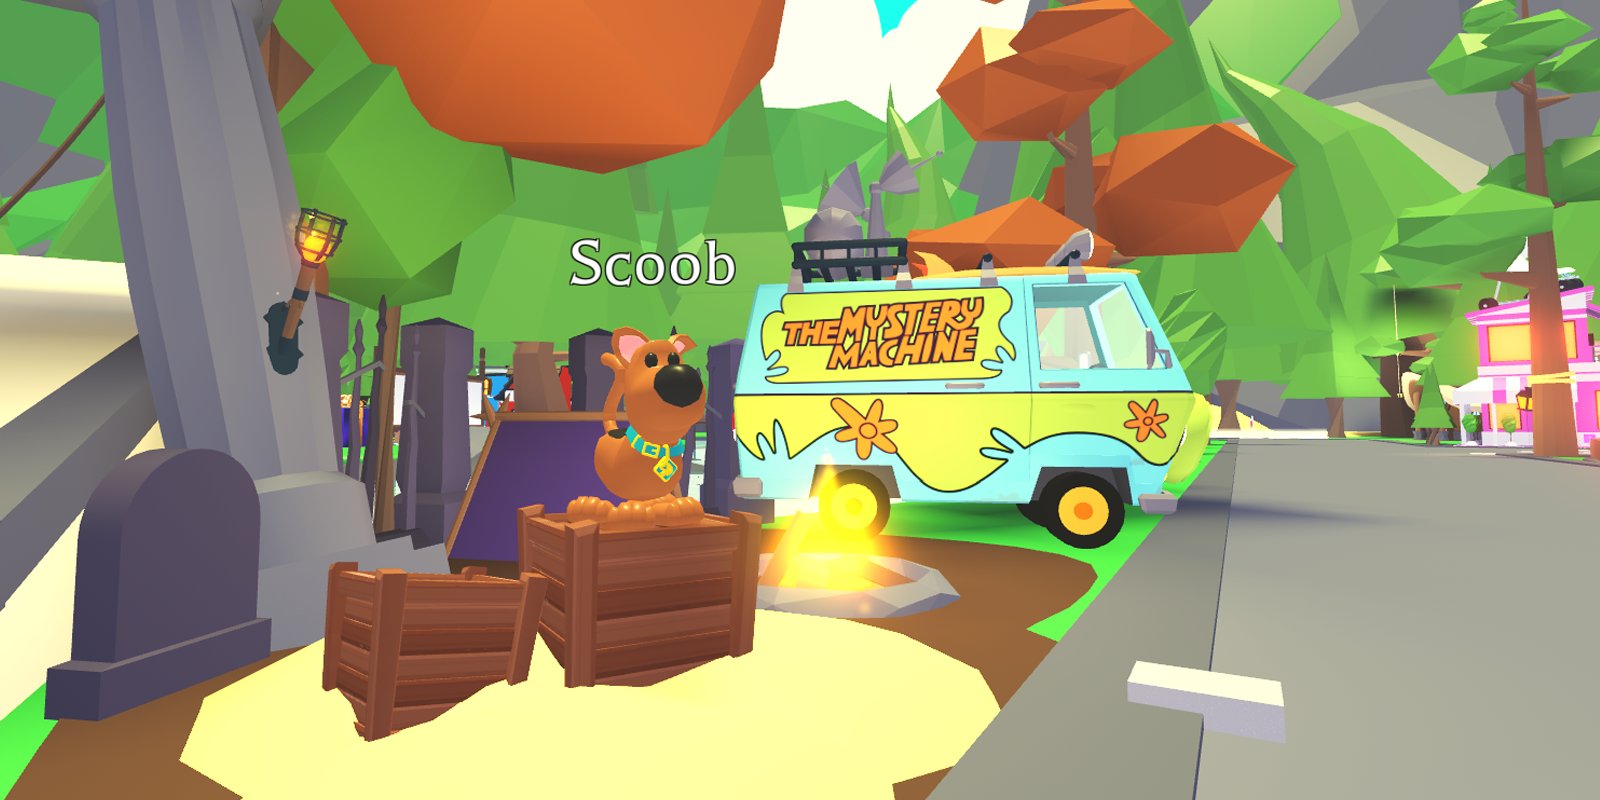 Adopt Me On Twitter You Can Join Scoob In Game In Just 30 Minutes Are You Ready To Solve The Mystery Of The Missing Collar Ad Scoob Wait In Game Https T Co Uwwmltng8y Https T Co Hyo9f2vnkw - scoob adopt me roblox